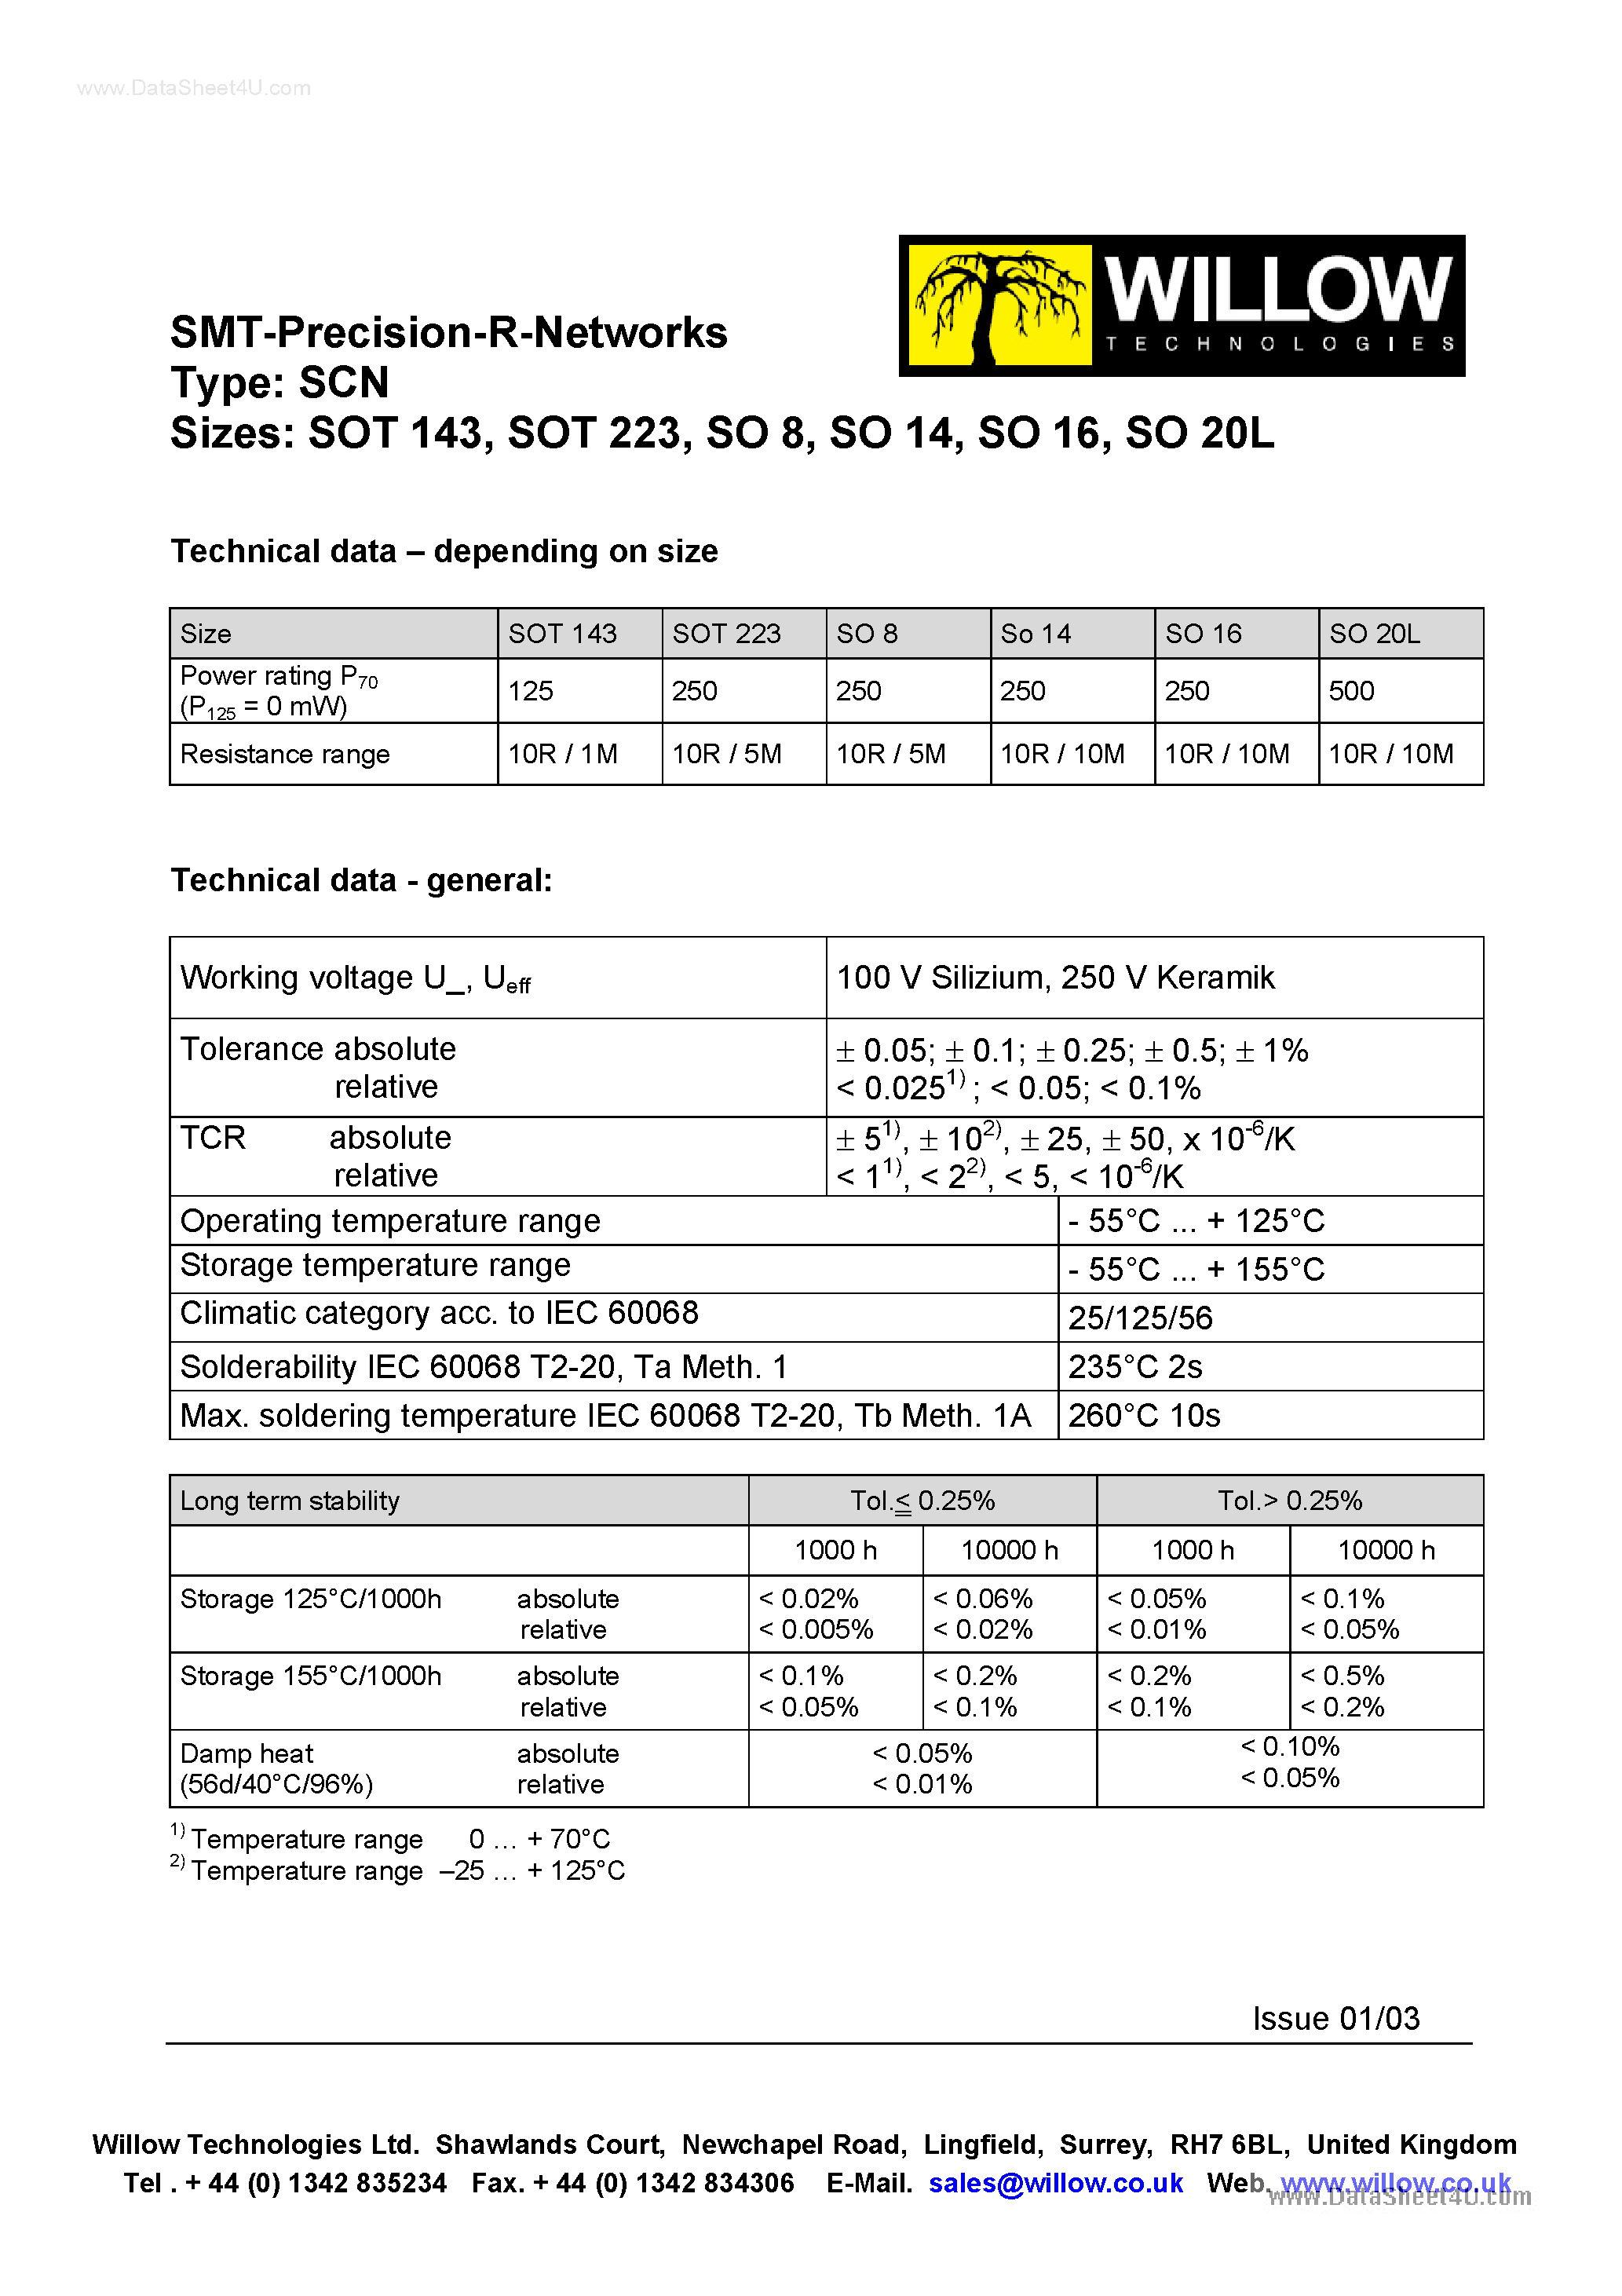 Datasheet SO14L - SMT-Precision-R-Networks page 2